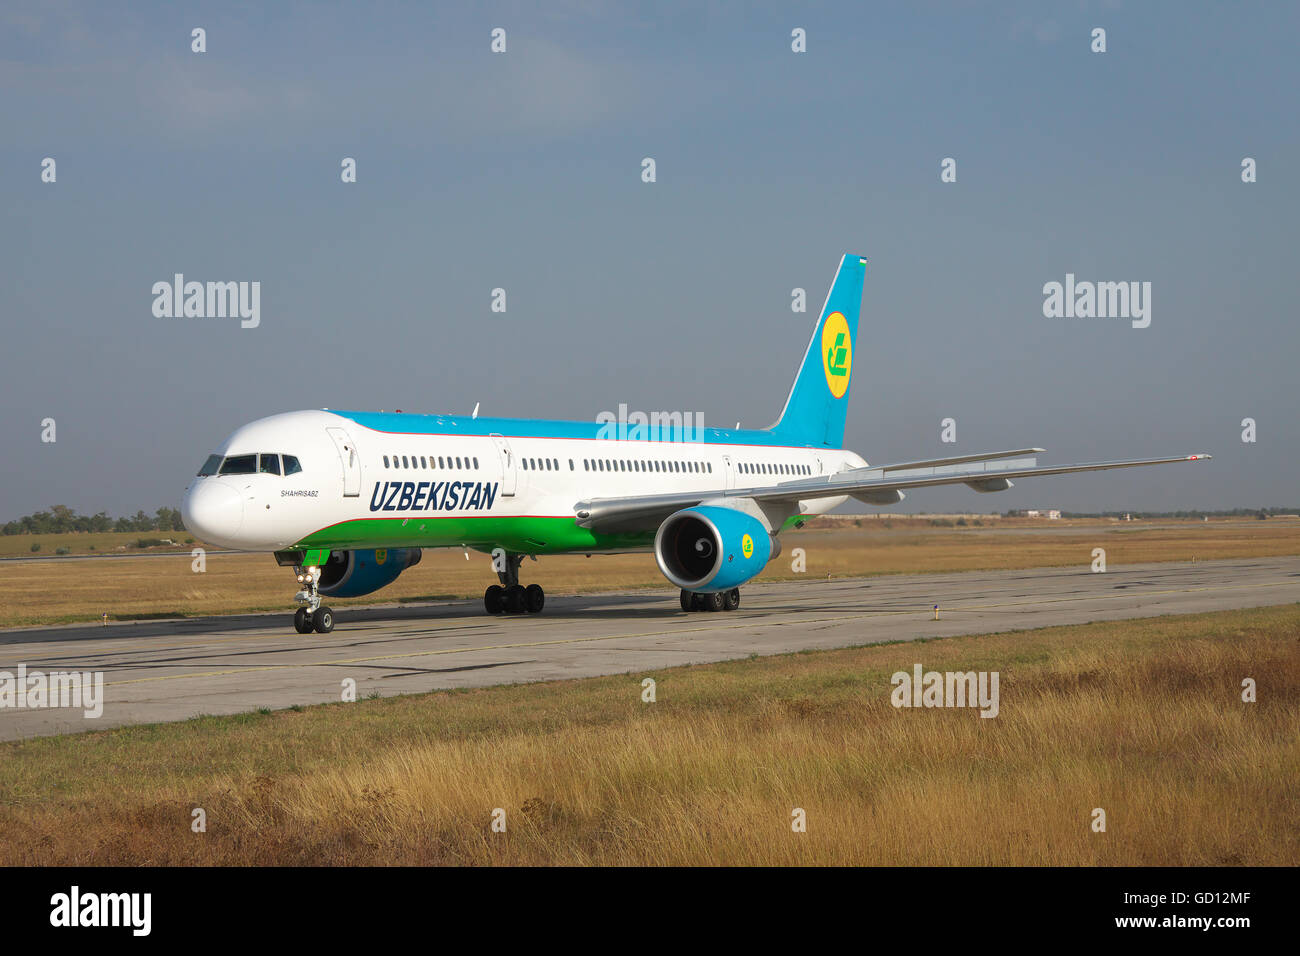 Simferopol, Ukraine - September 13, 2010: Uzbekistan Airways Bowing 757-200 is taxiing along the taxiway in the airport Stock Photo